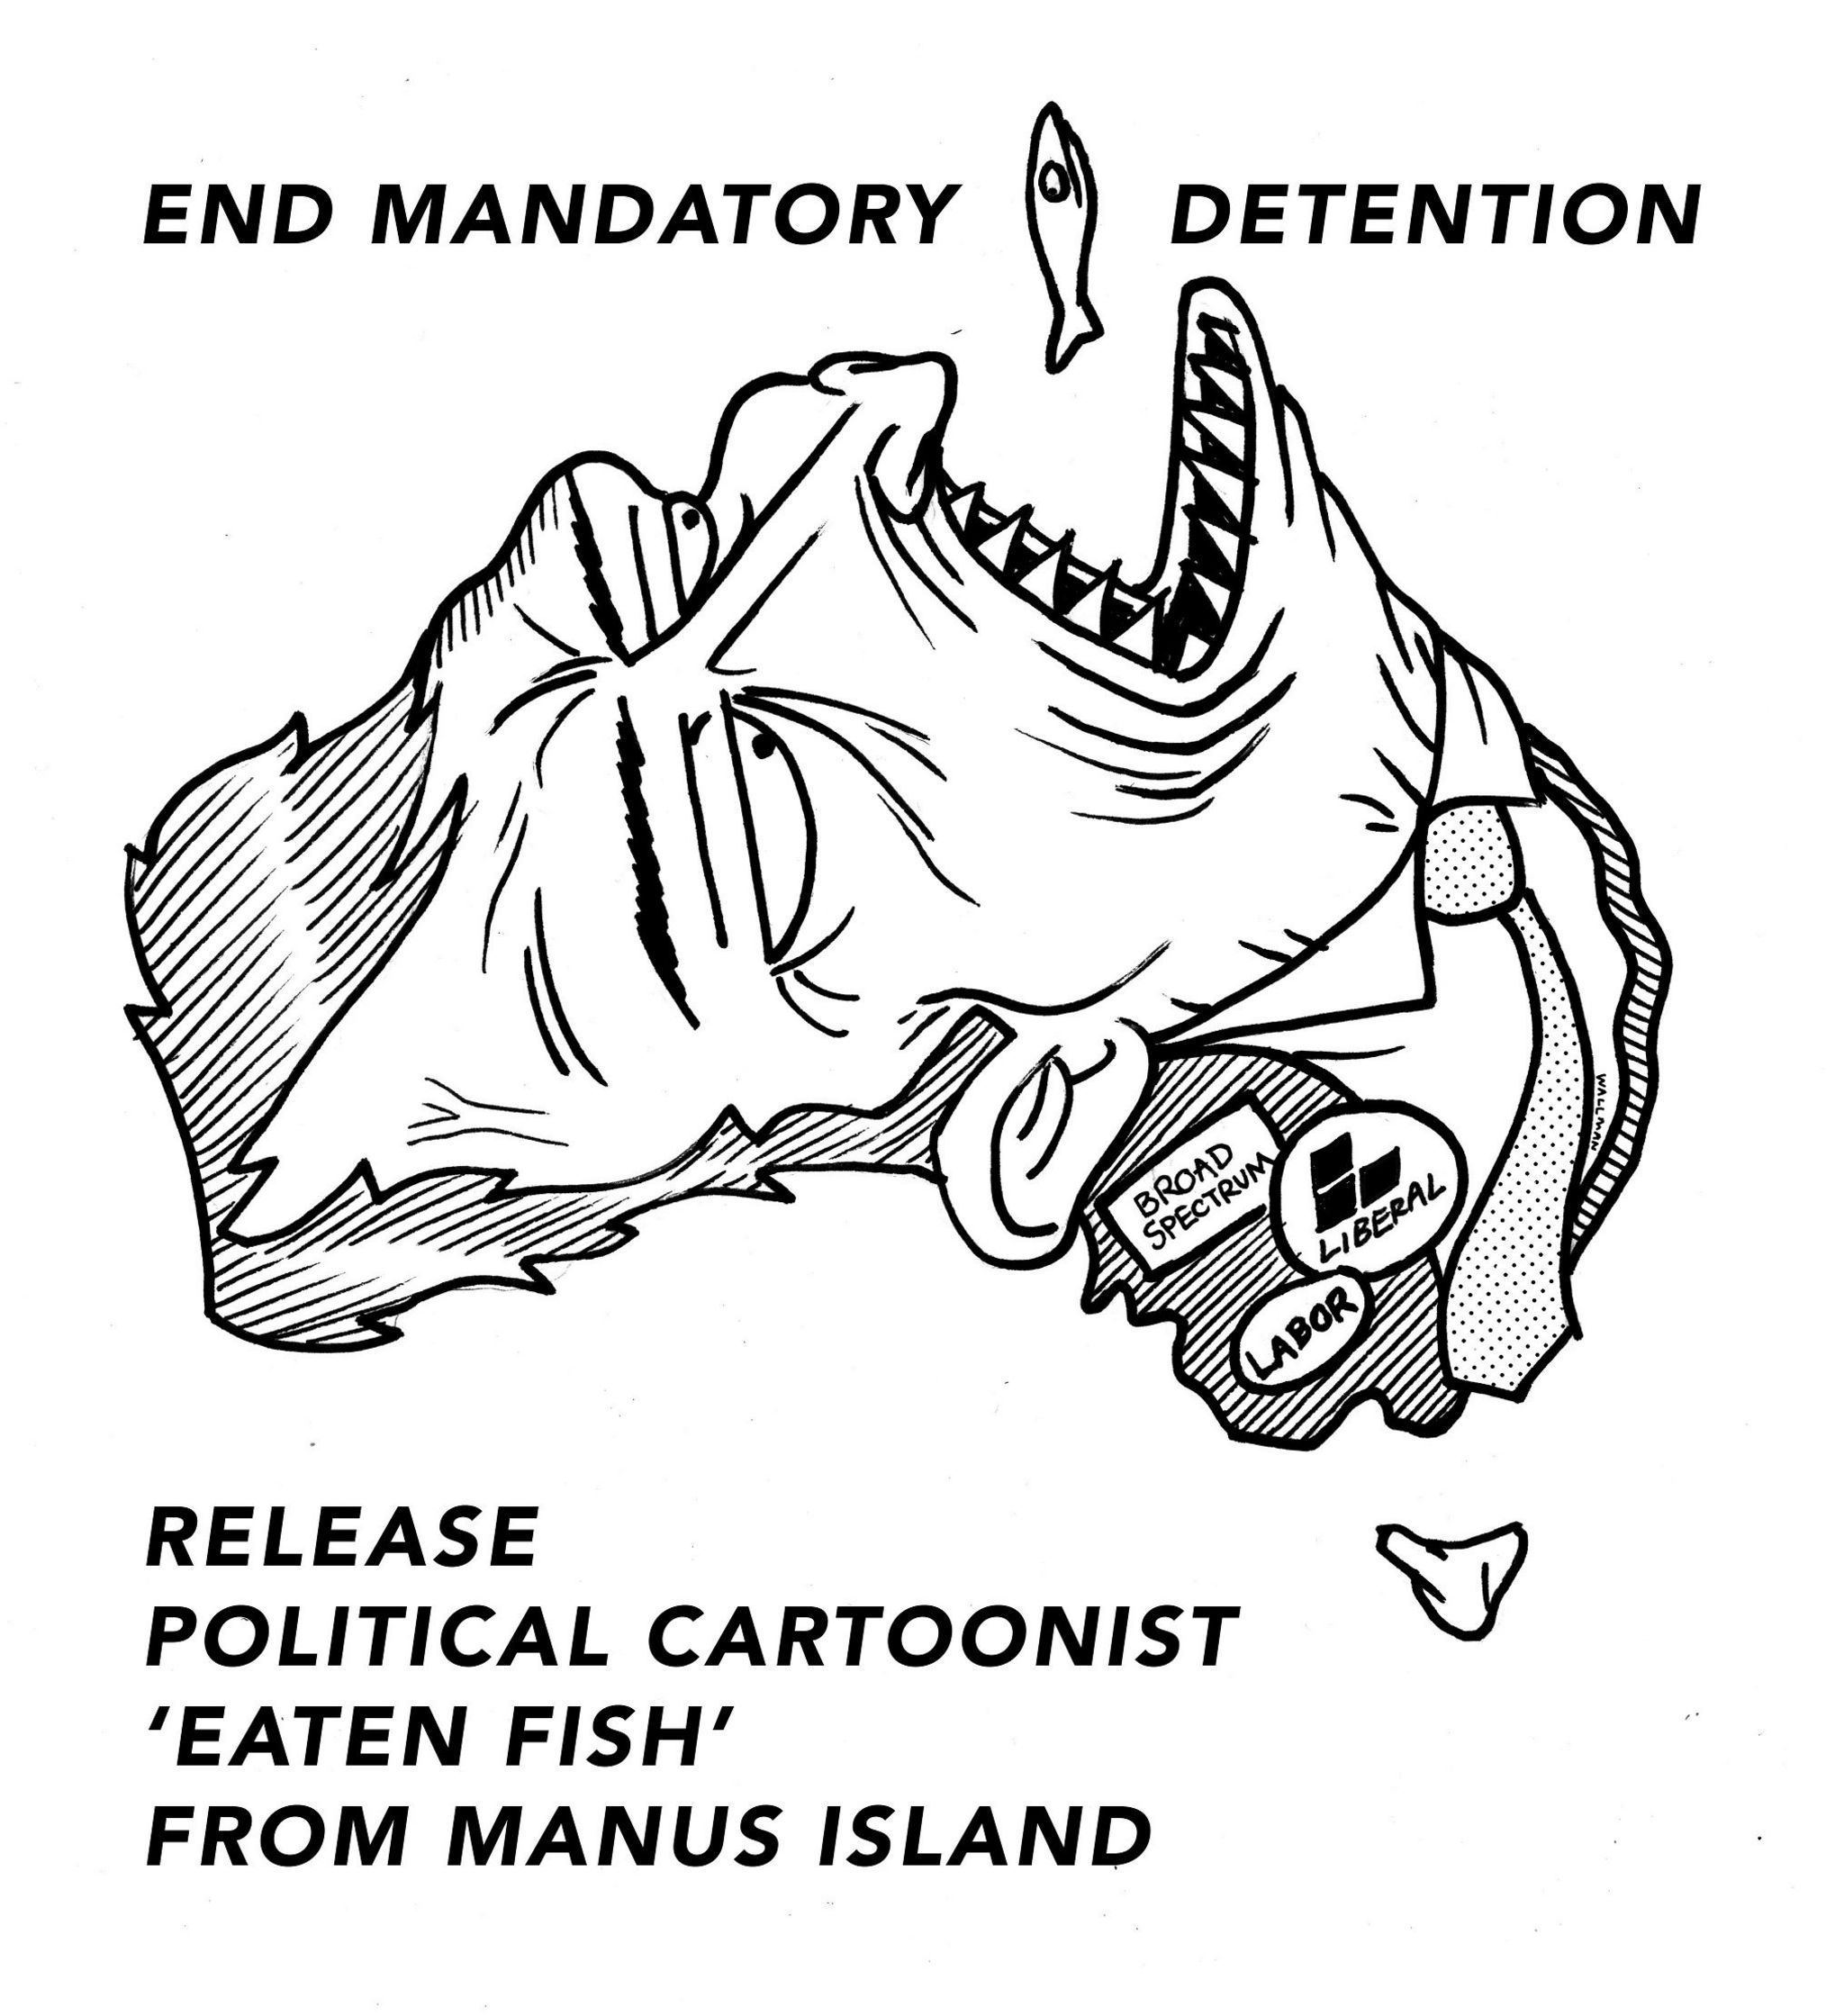 Sam Wallman's cartoon showing Australia, as a face, trying to eat a fish